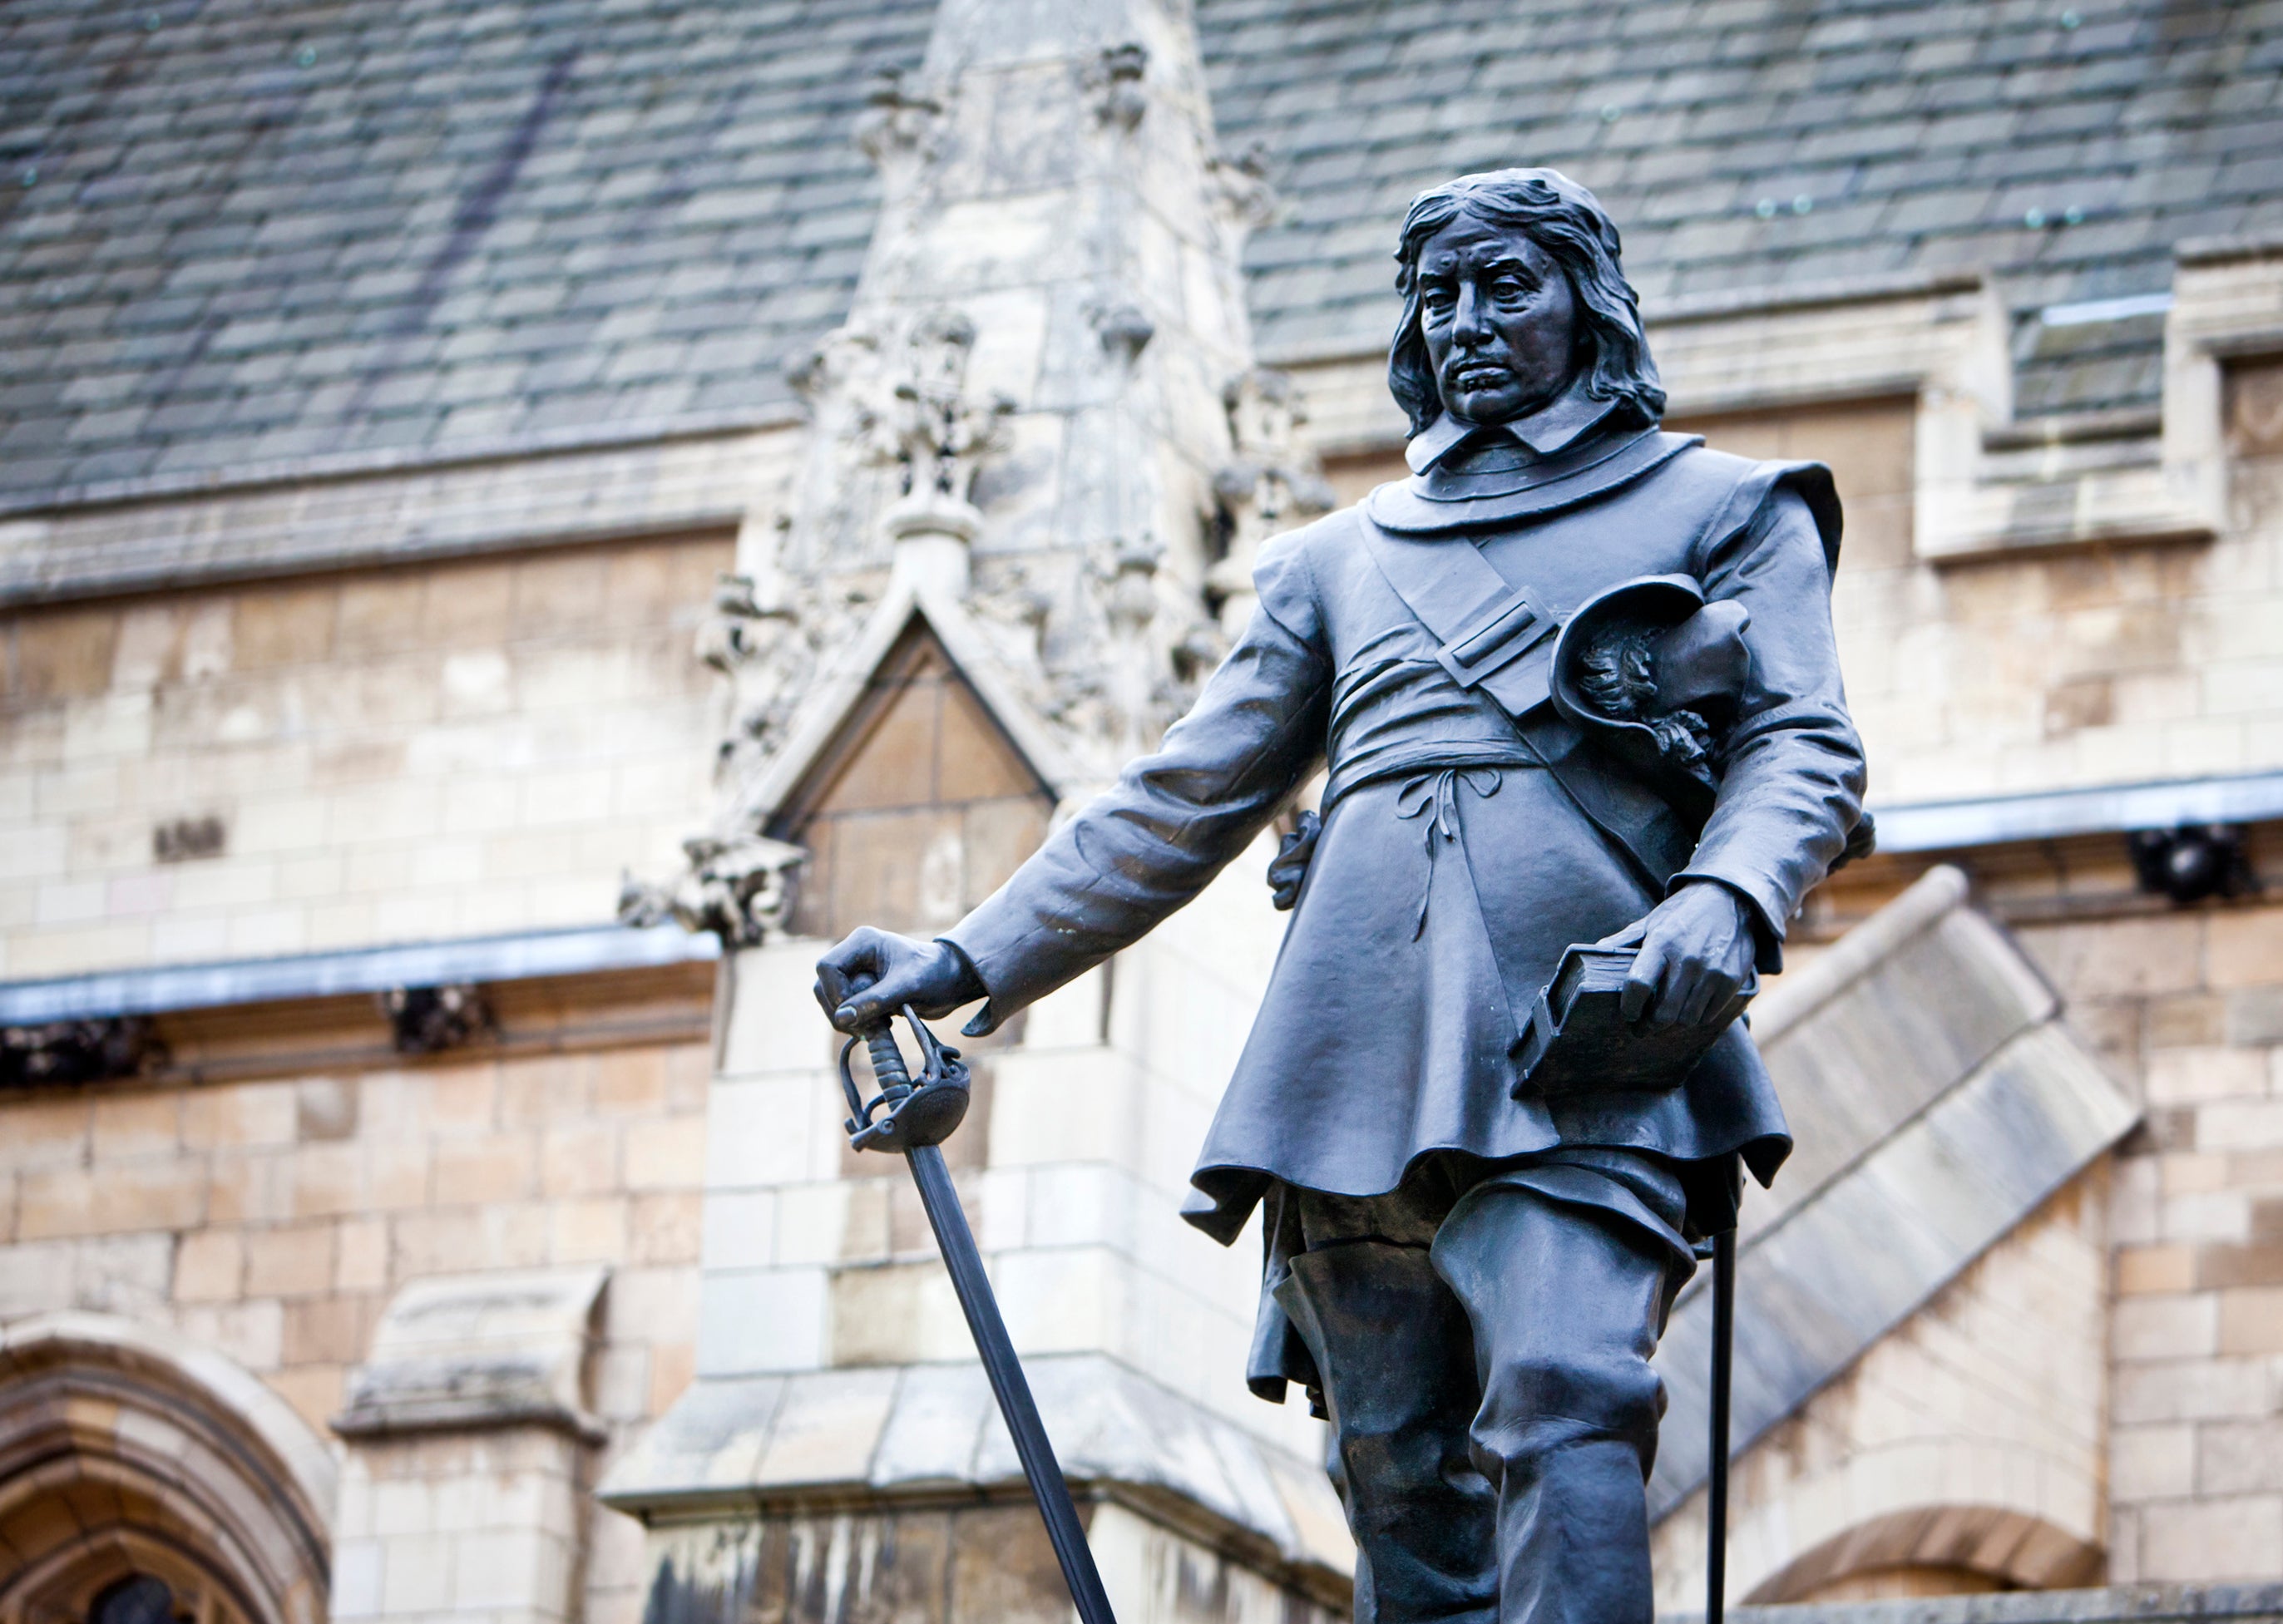 Oliver Cromwell makes the list